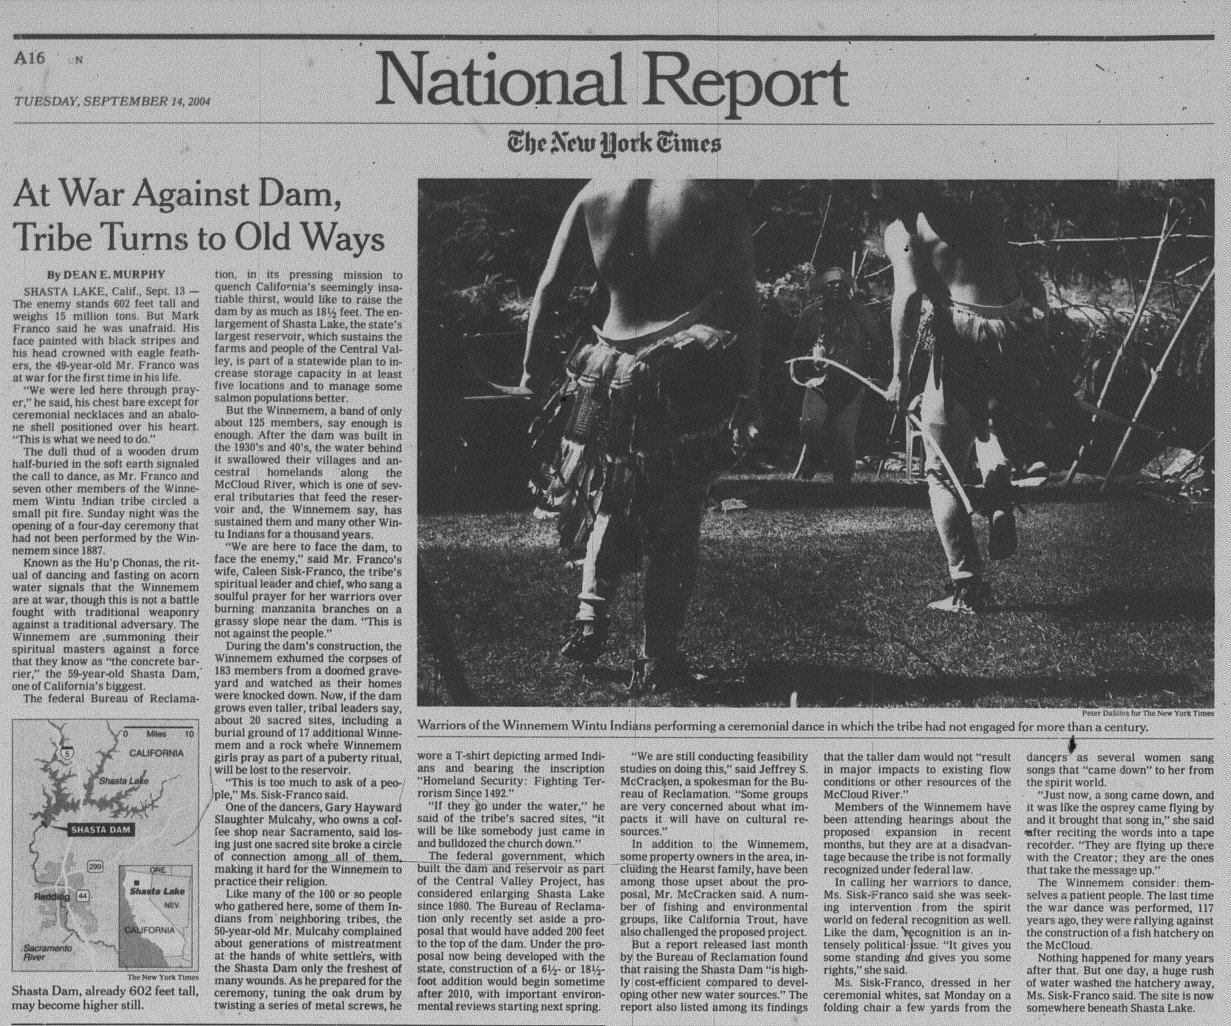  News of the Winnemem Wintu’s war dance on Shasta Dam in 2004 was published around the world, including this September 14, 2004 story in the New York Times. 